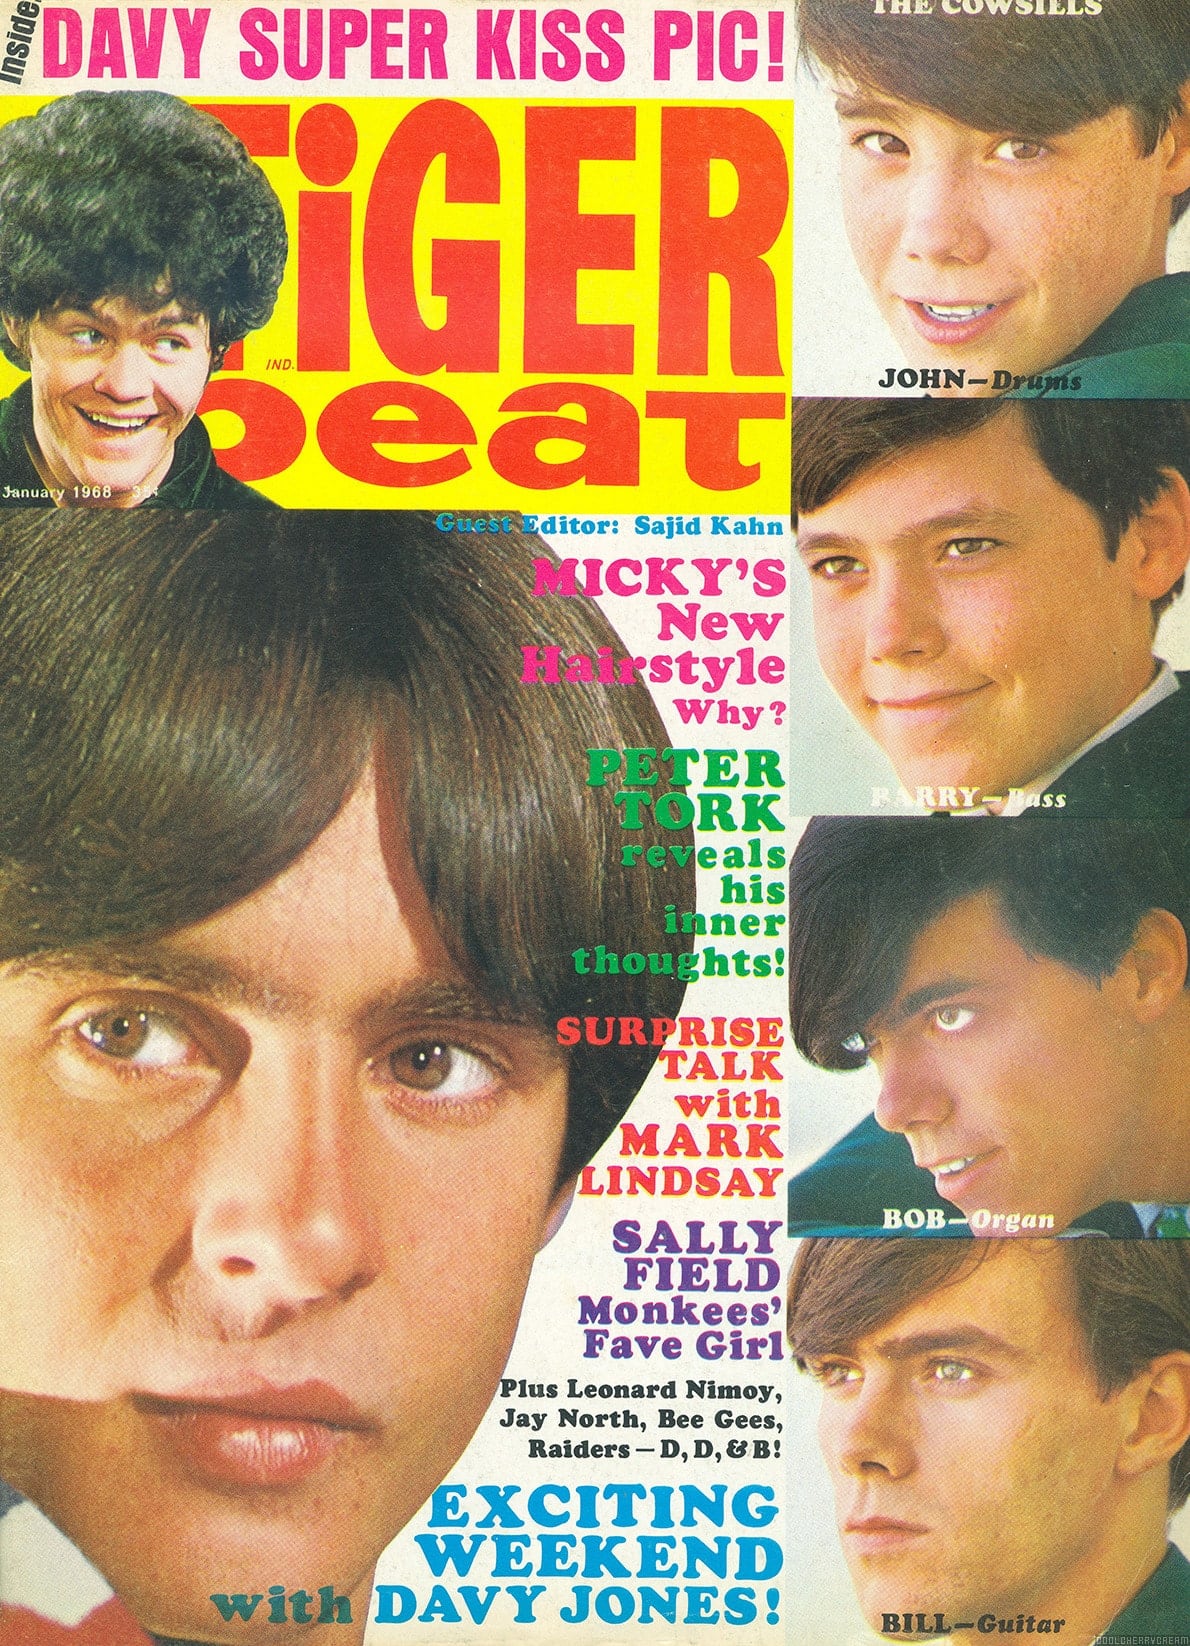 Monkees Answer 20 Questions, Tiger Beat (March 1967), Sunshine Factory